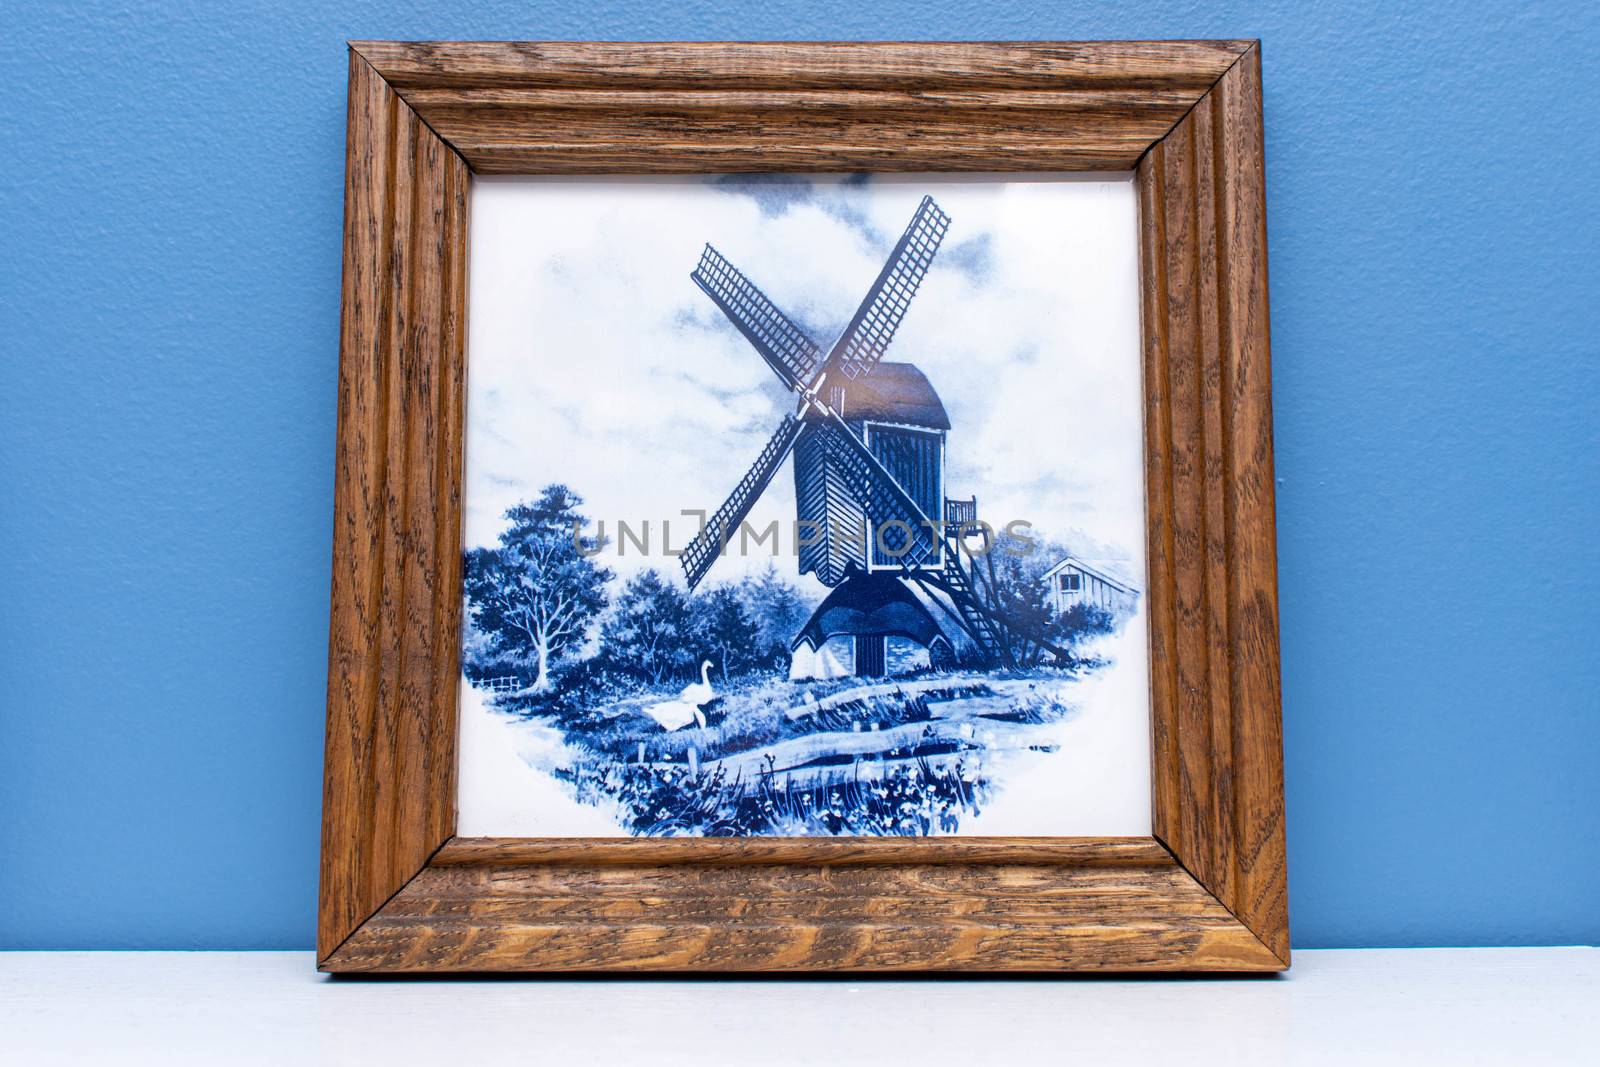 Delft Blue tile in a frame, a souvenir from Holland/Netherlands. hanging on a wall making a windmill and typical farm scene.